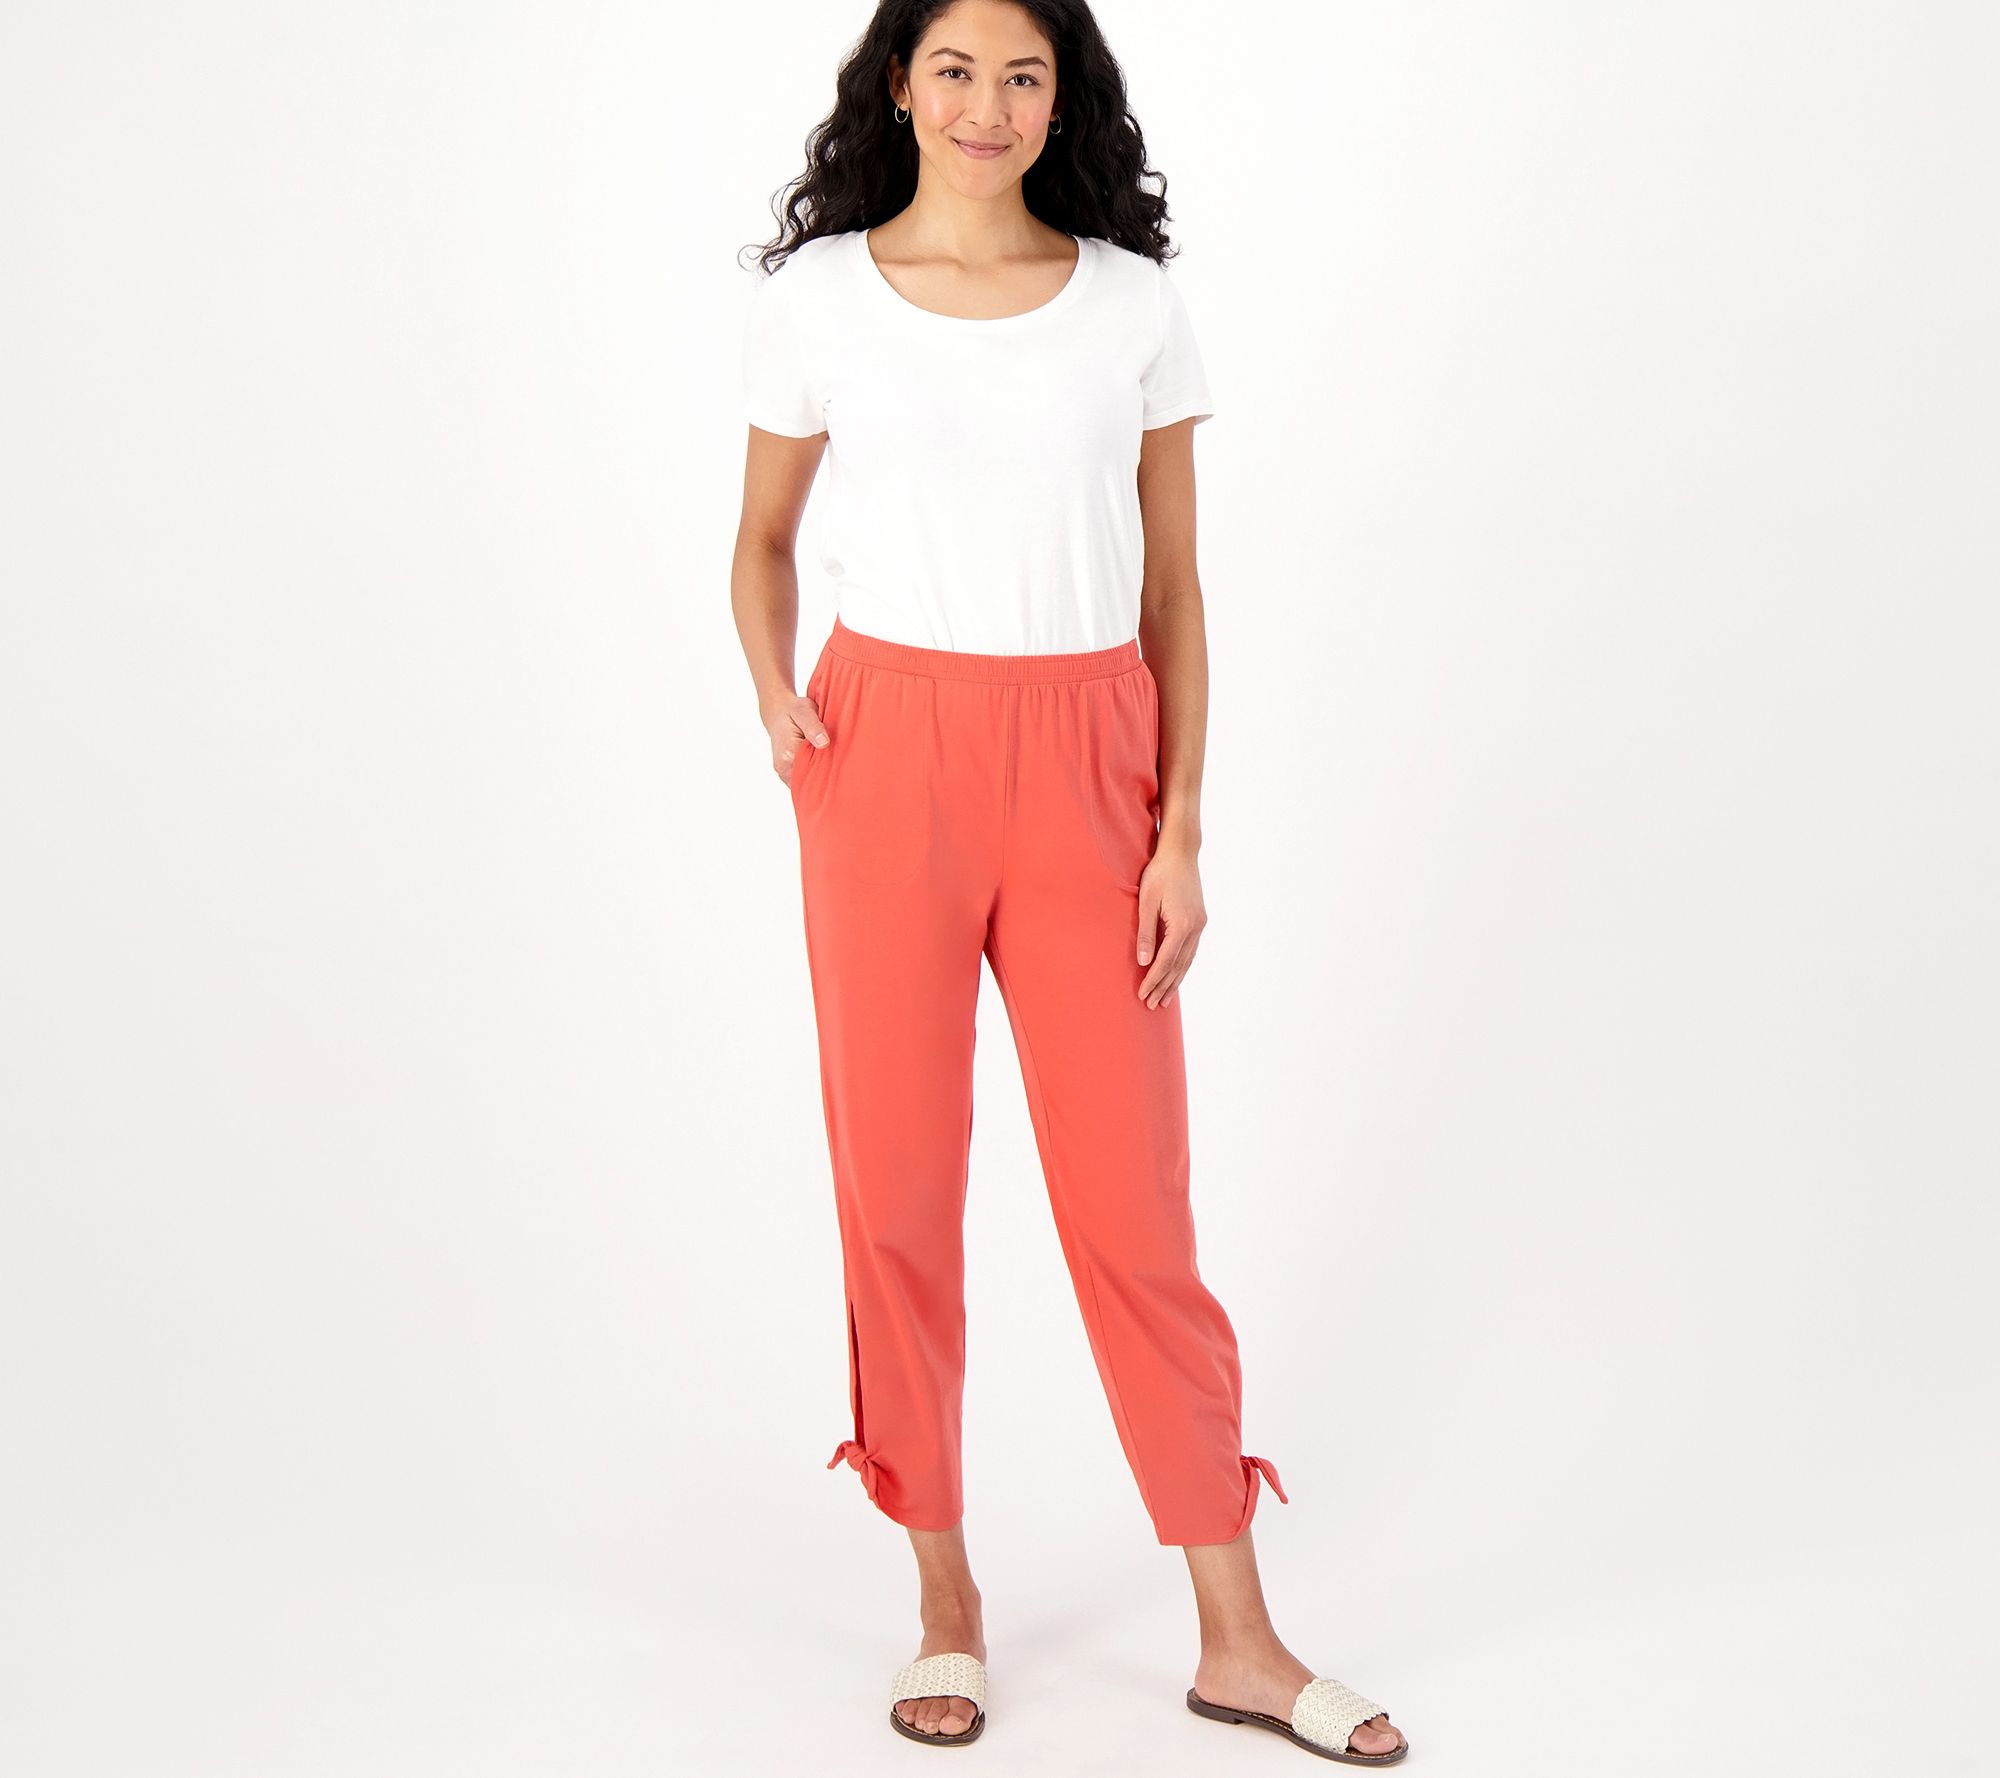 AnyBody Textured Jersey Pant with Tie Detail - QVC.com